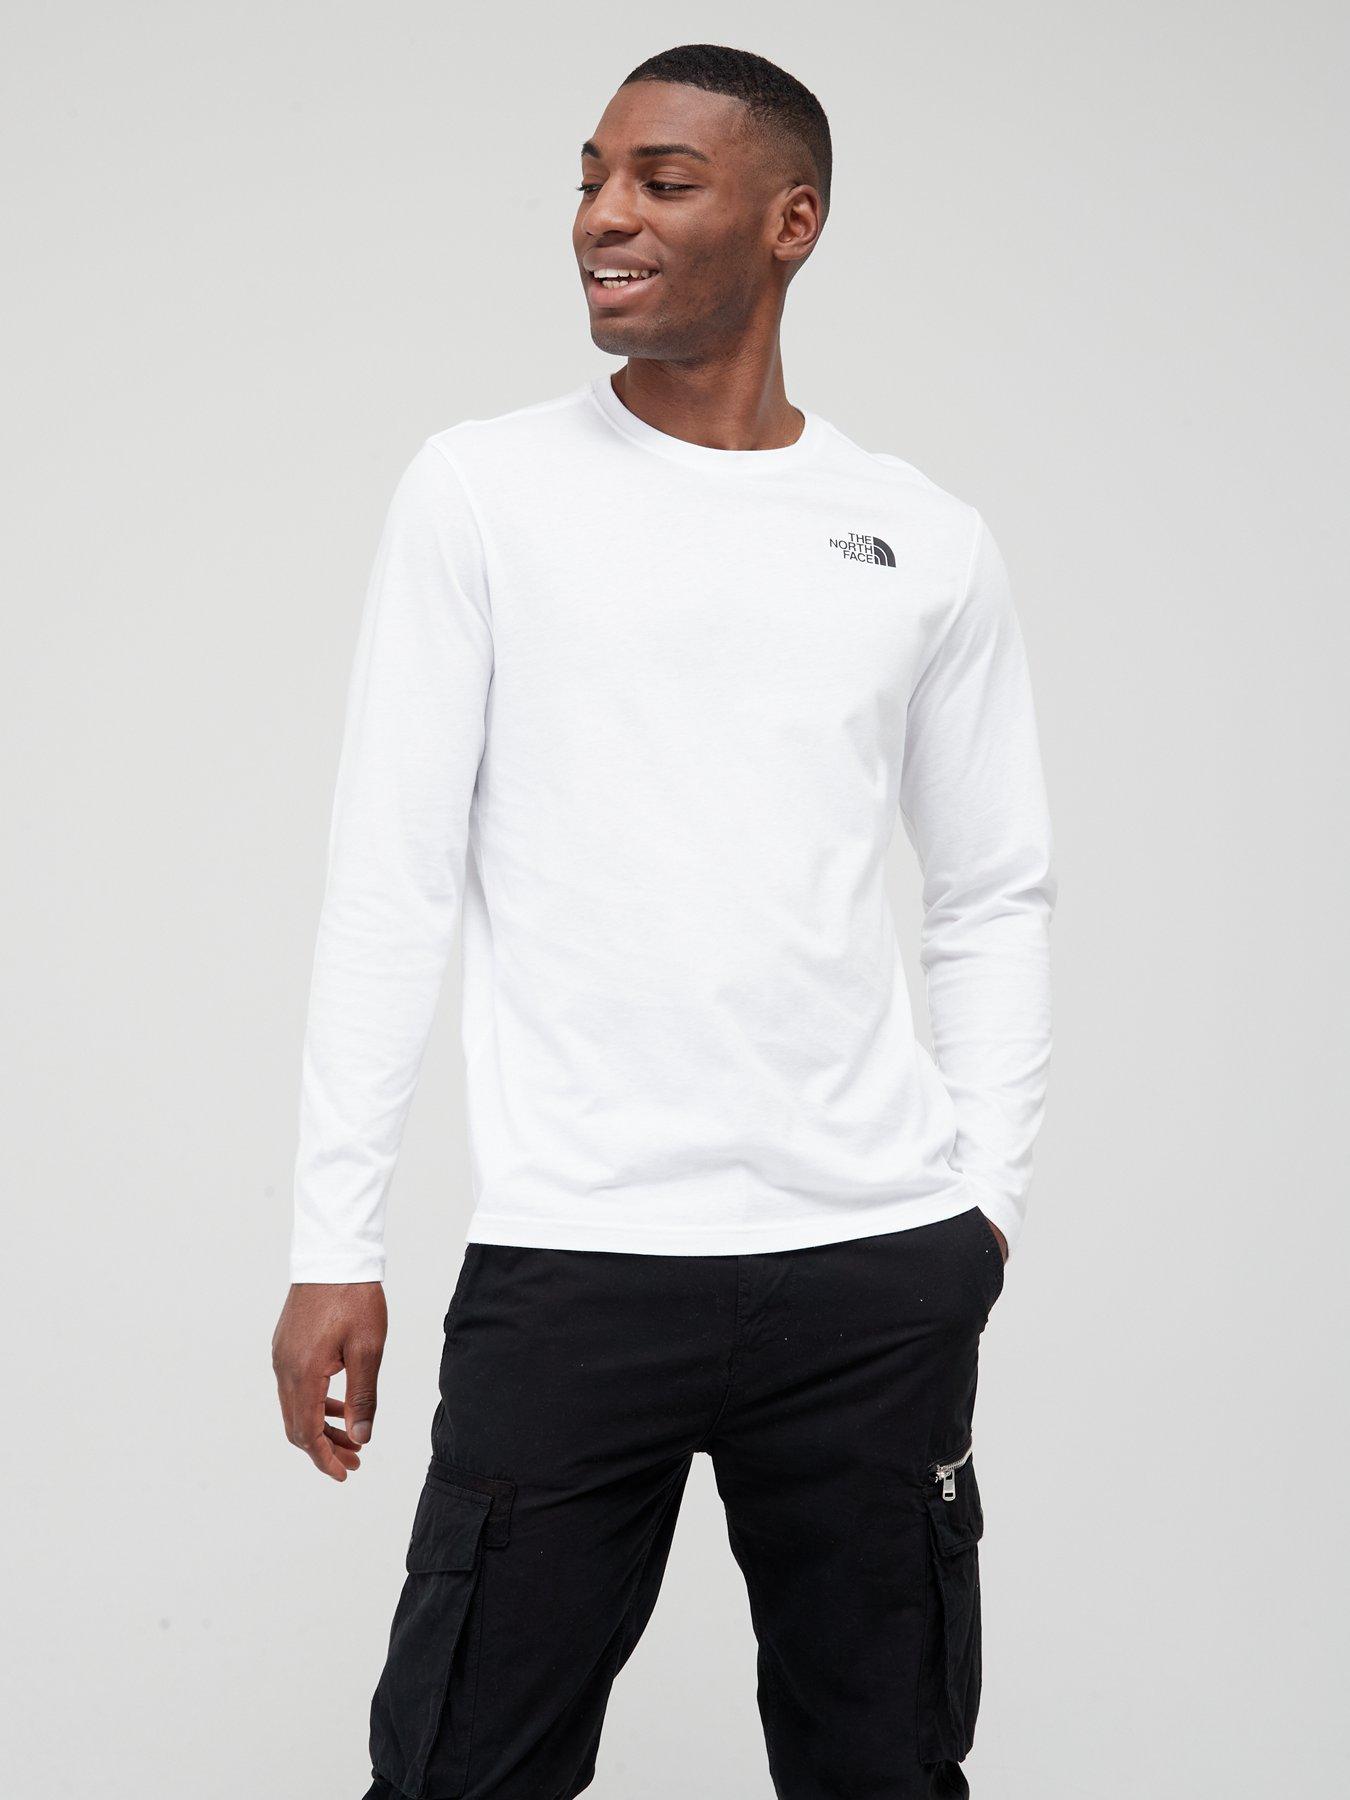 THE NORTH FACE Men's Red Box L/S T-Shirt - White/Black